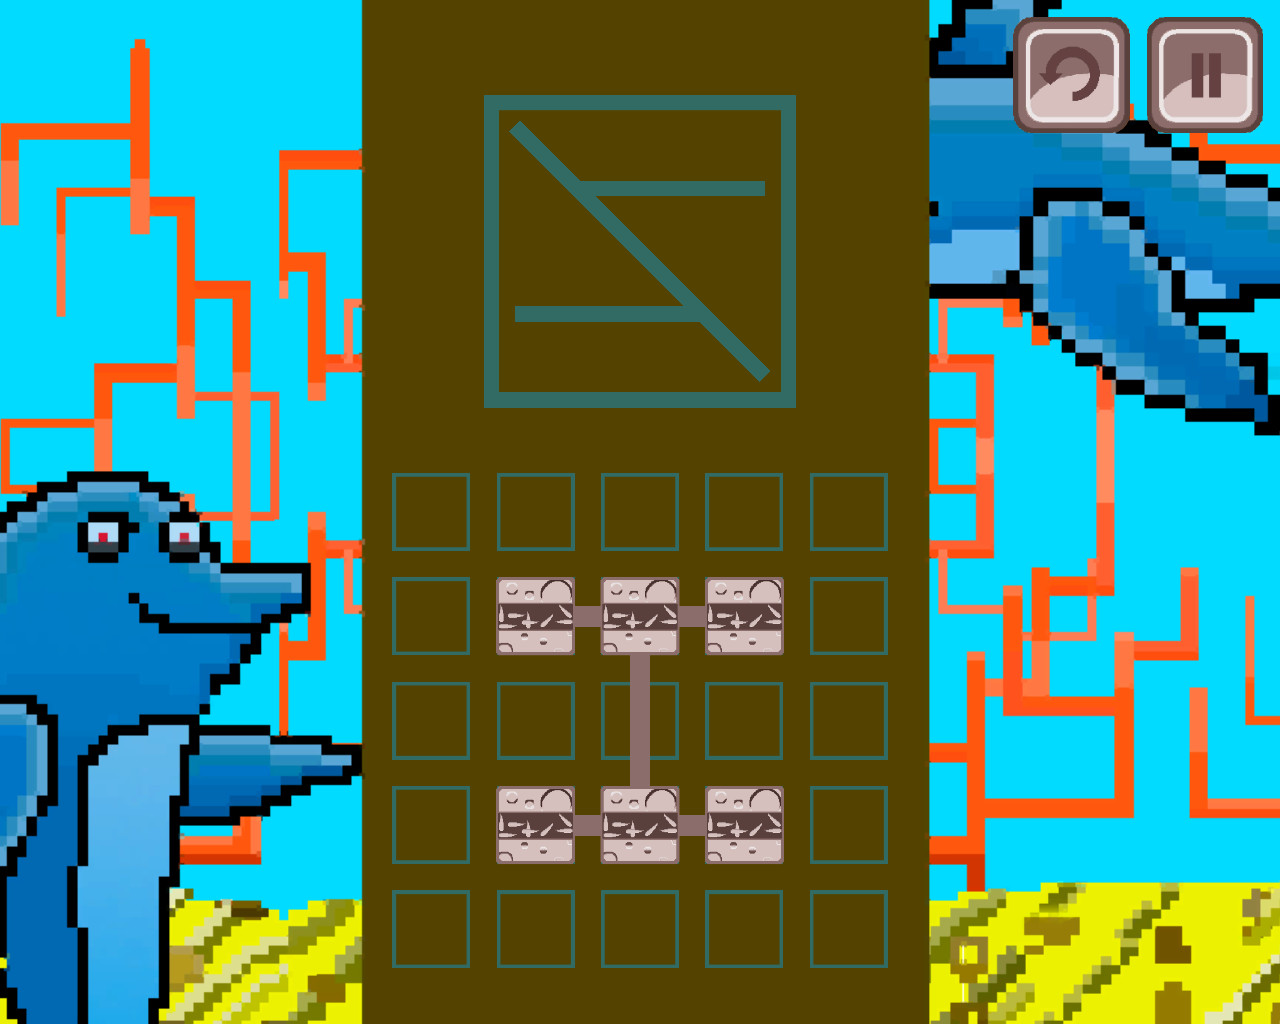 Dolphins-cyborgs and open space screenshot